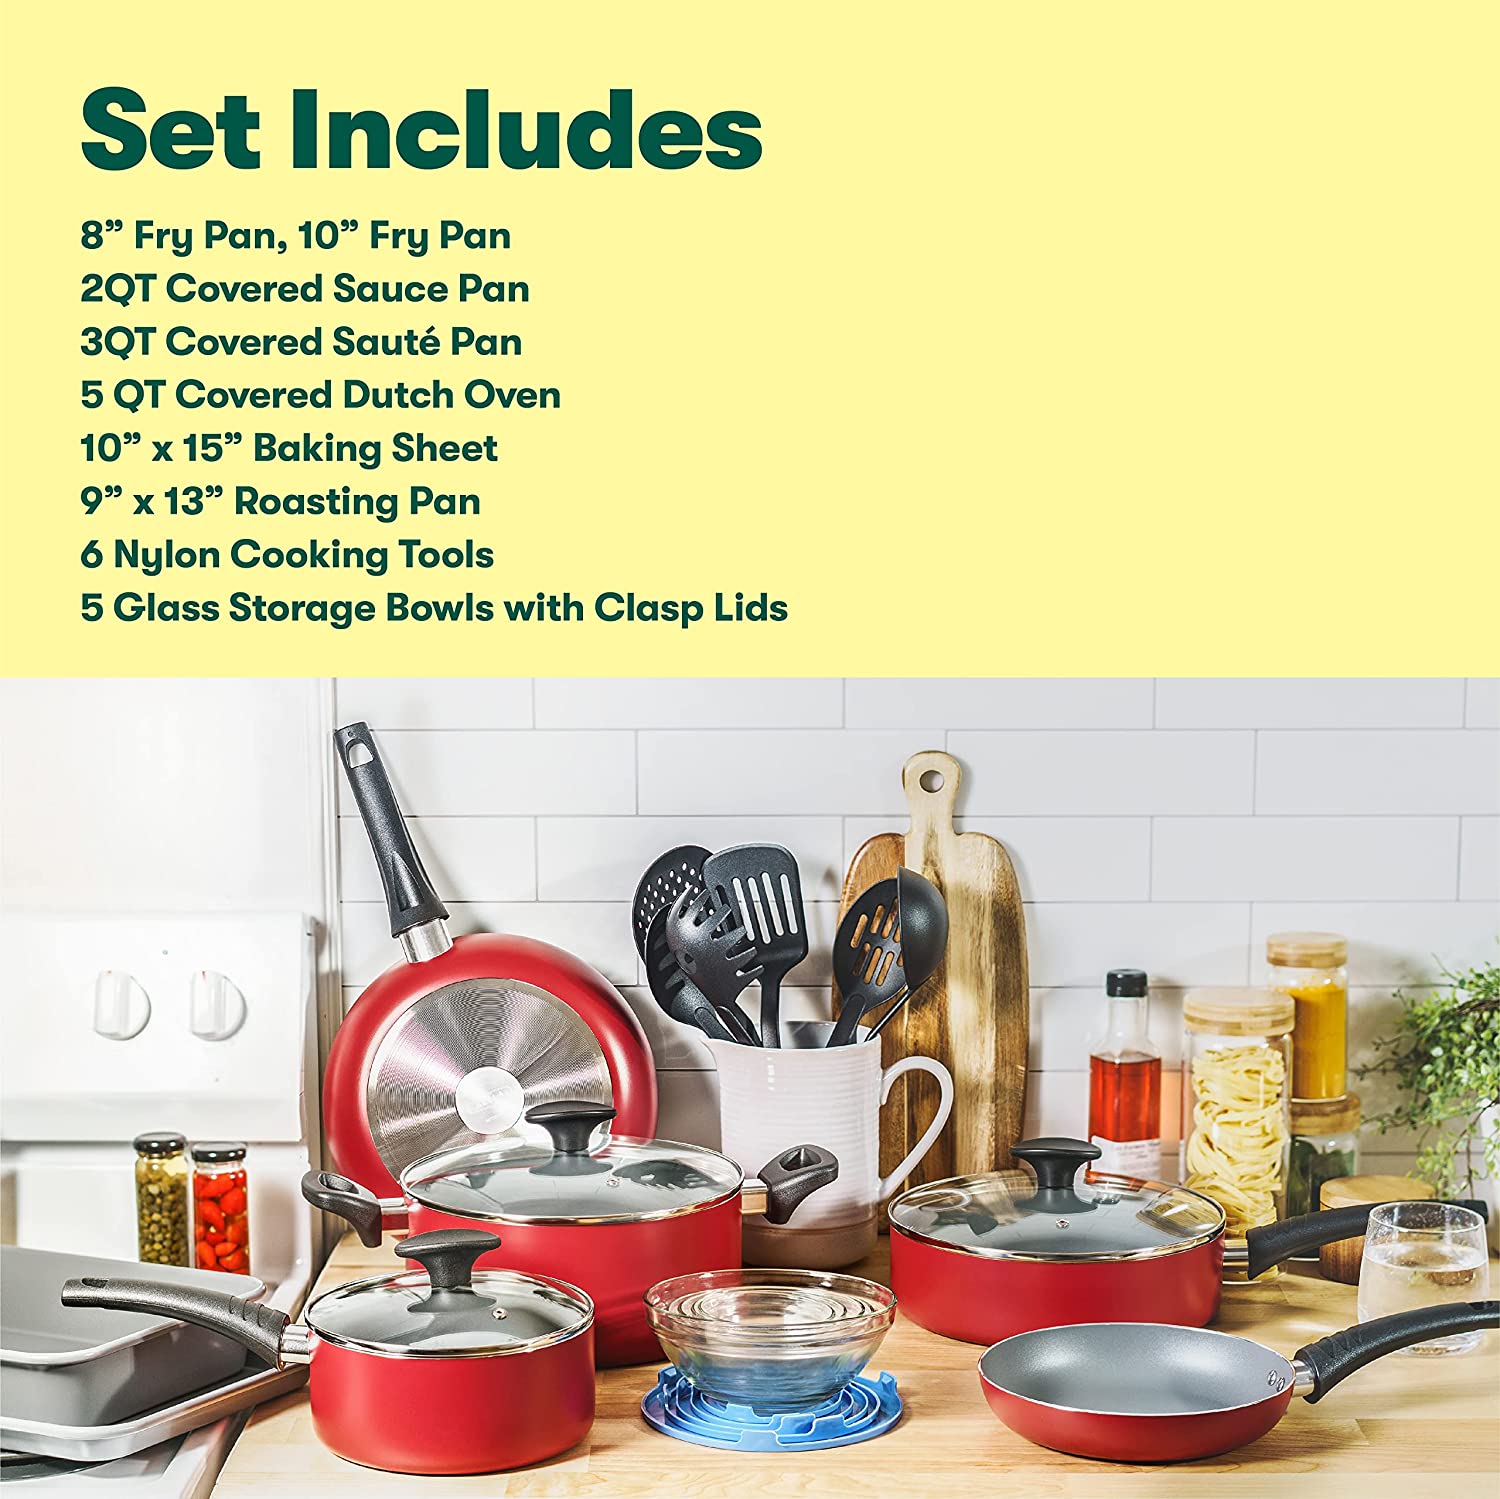 https://bigbigmart.com/wp-content/uploads/2023/06/BELLA-Nonstick-Cookware-Set-with-Glass-Lids-Aluminum-Bakeware-Pots-and-Pans-Storage-Bowls-Utensils-Compatible-with-All-Stovetops-21-Piece-Red2.jpg